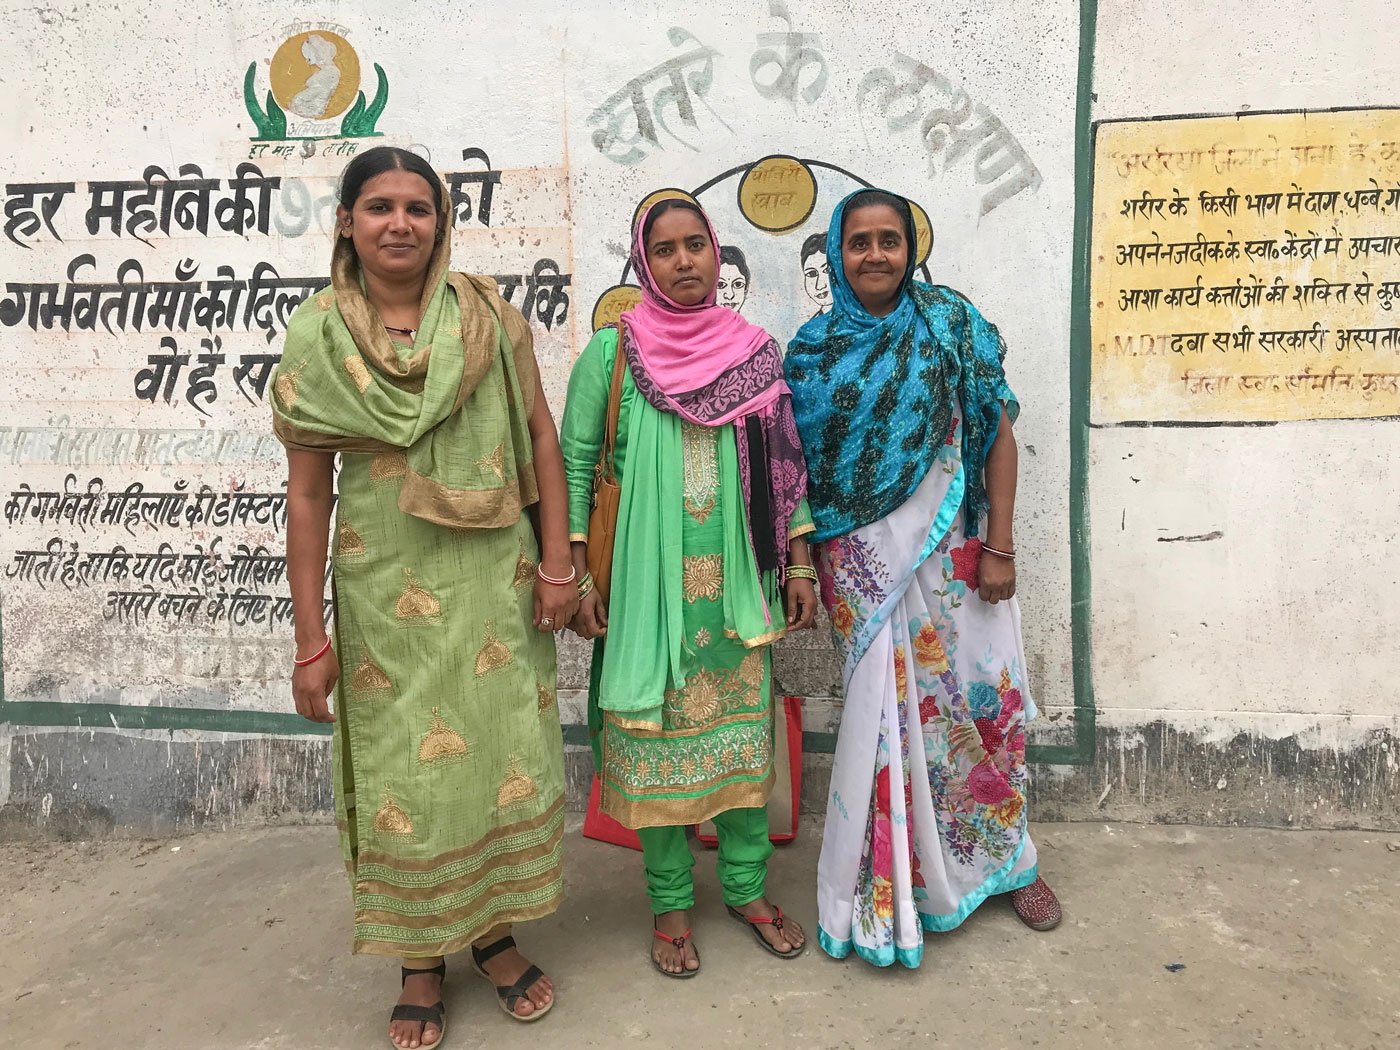 'As women, we can’t be seen talking to men about sterilisation' say ASHA workers in Rampur village of Bihar's Araria district: Nusrat Banno (left), Nikhat Naaz (middle) and Zubeida Begum (right)

